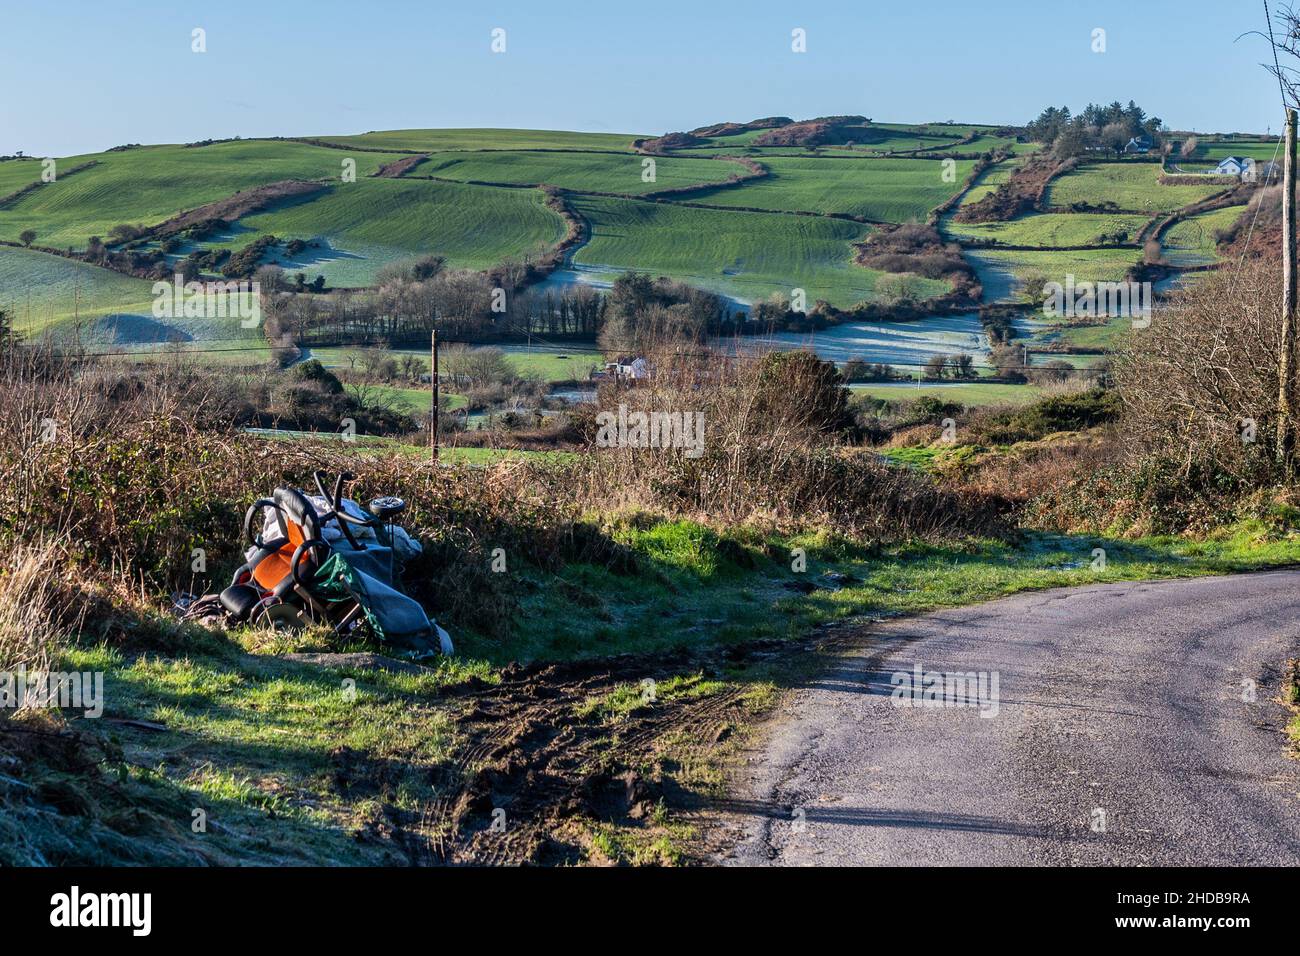 Rosscarbery, West Cork, Ireland. 5th Jan, 2022. Household rubbish has been dumped in the countryside near Rosscarbery in West Cork. A local resident out walking discovered the rubbish last night, which consists of carpets, chairs, a pushchair and other garbage. Credit: AG News/Alamy Live News Stock Photo